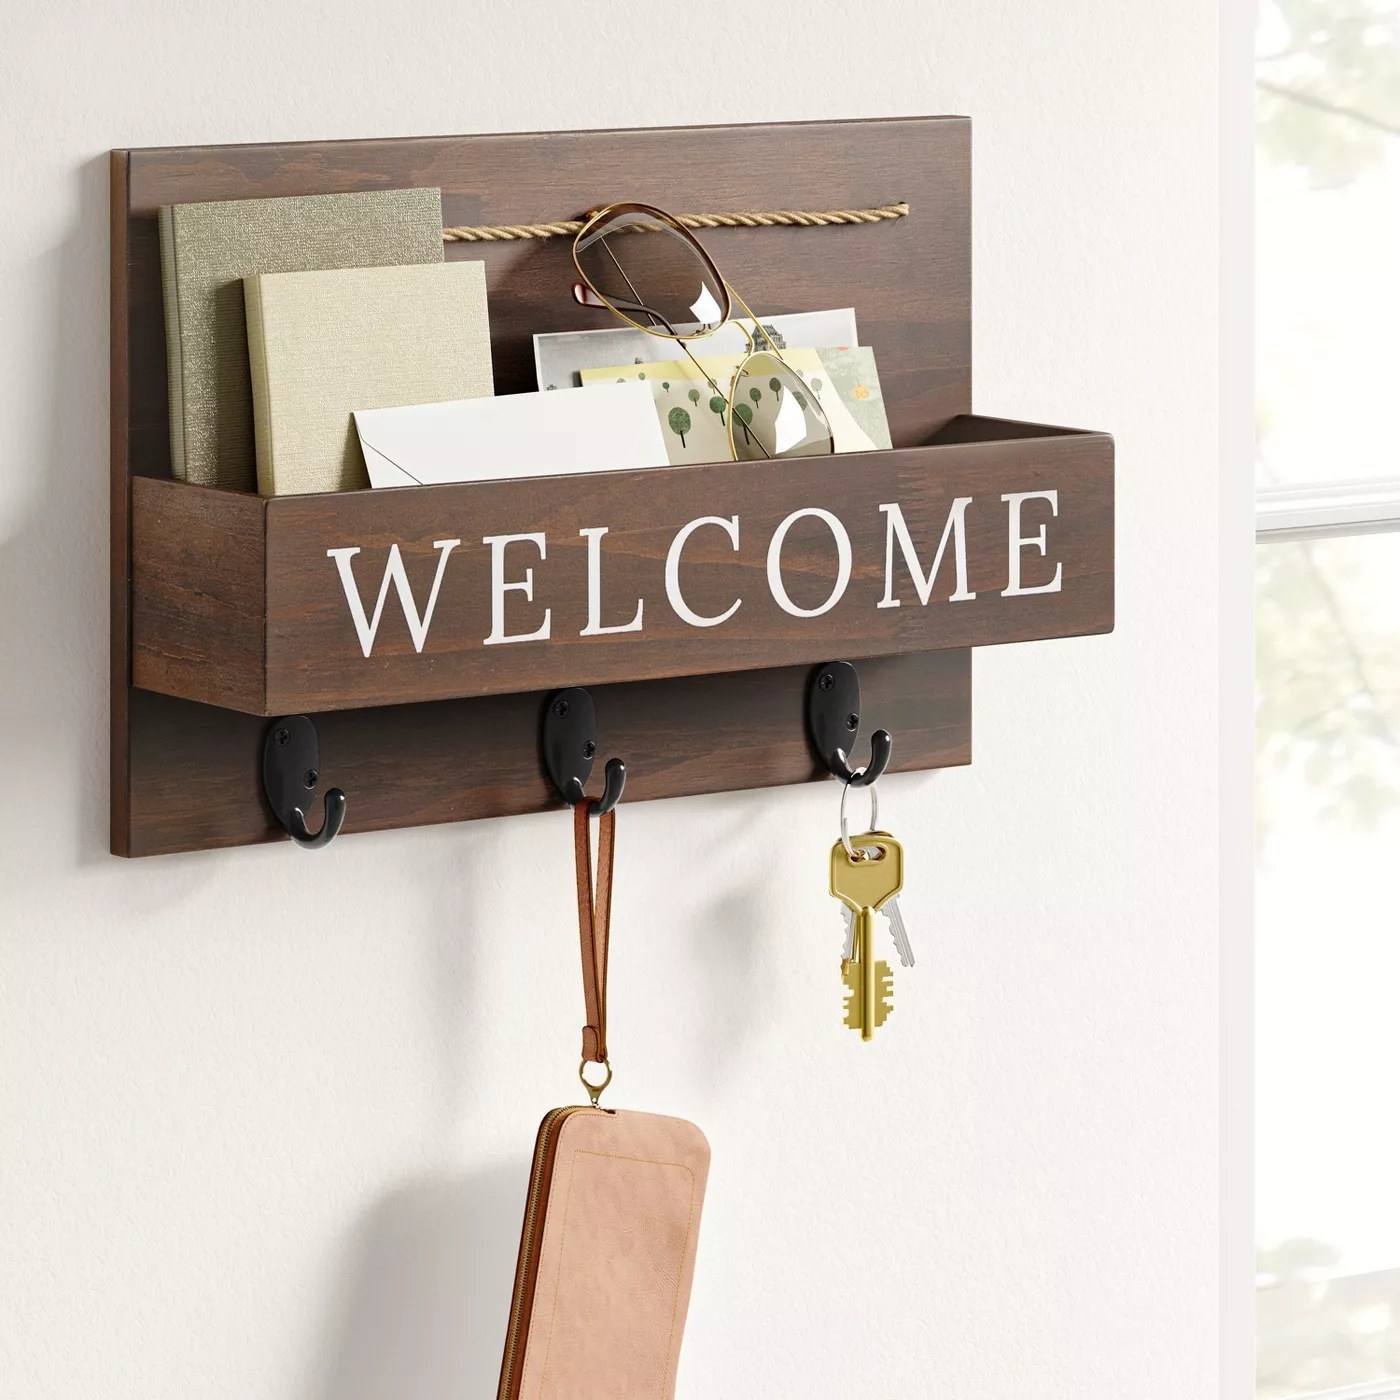 The &quot;Welcome&quot; sign with a bin for letters and three hooks underneath